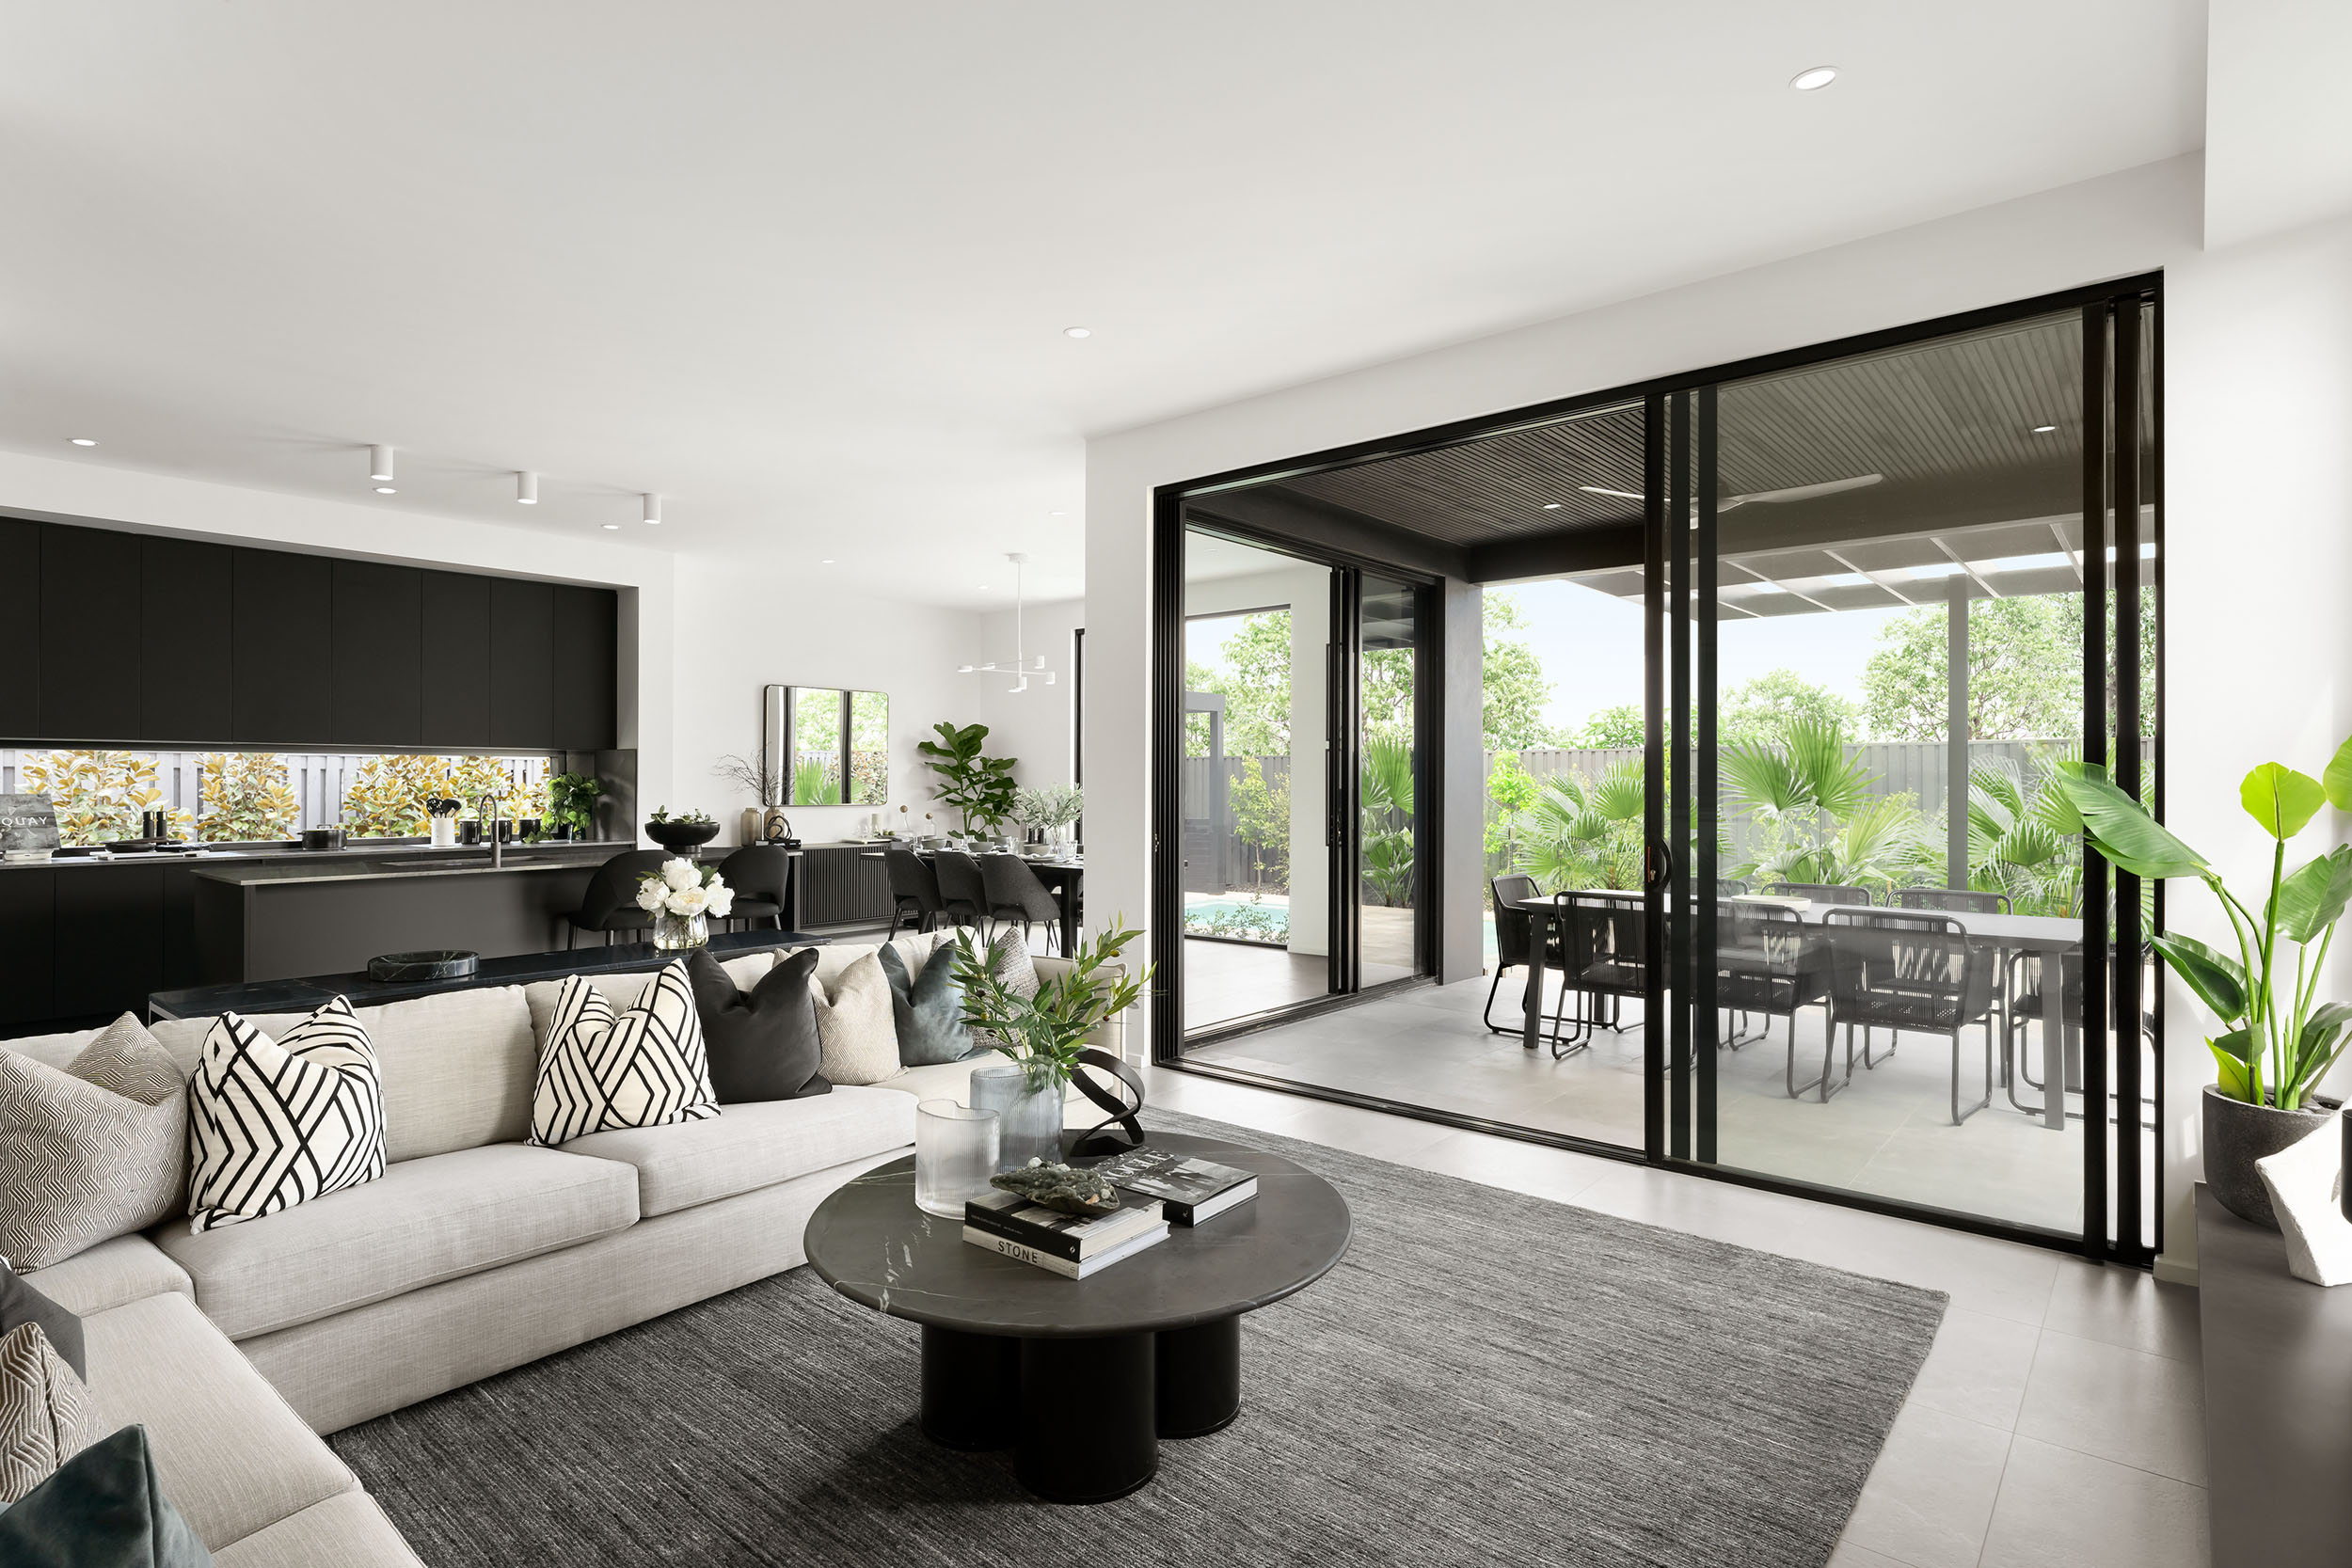 Stylish affordable house and land packages Canberra